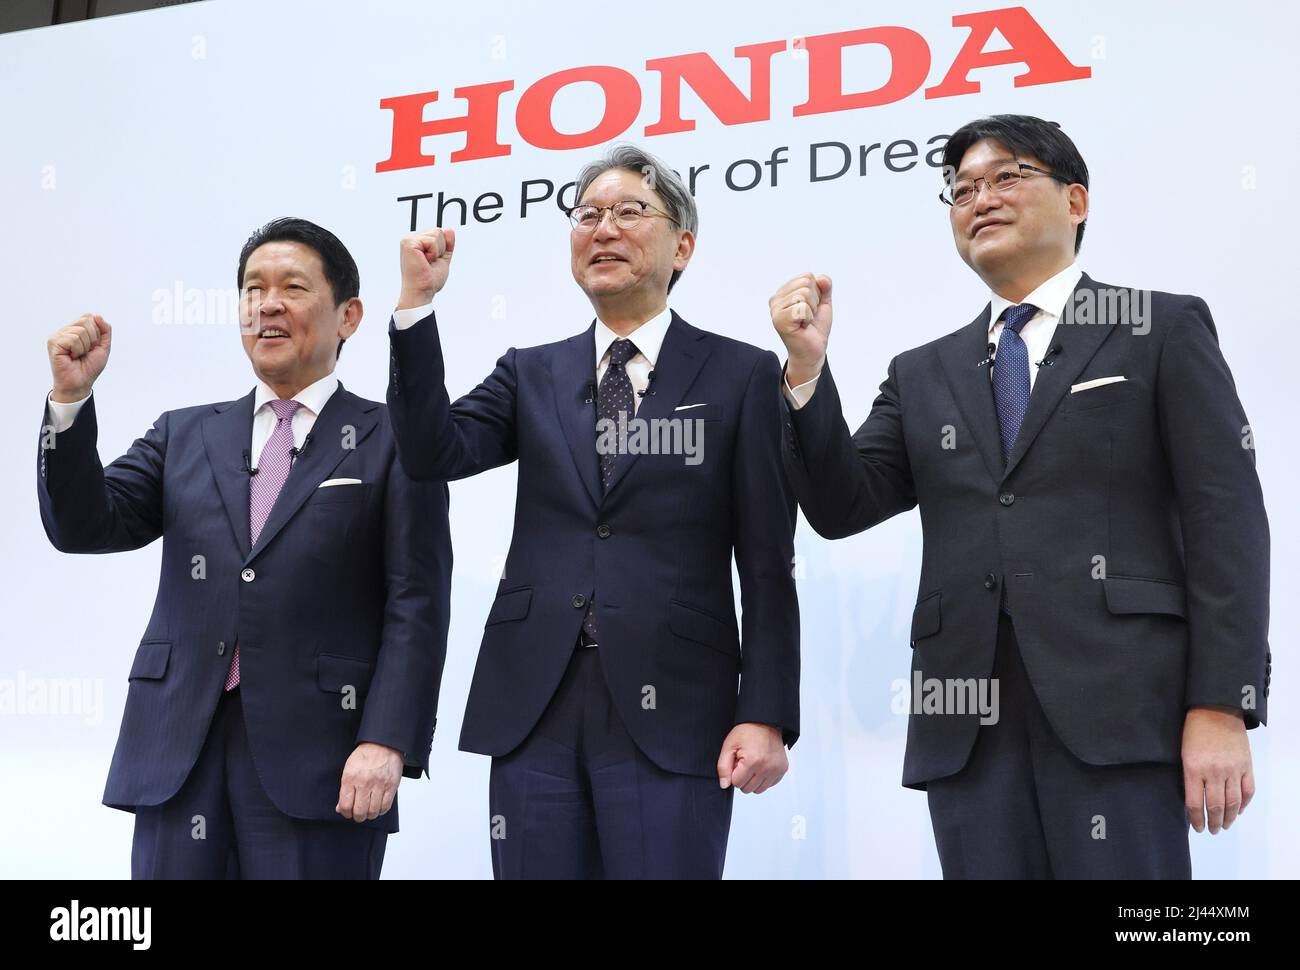 Tokyo, Japan. 12th Apr, 2022. Japan's automobile giant Honda Motor (L-R) senior managing executive officer Shinji Aoyama, president Toshihiro Mibe and executive vice president Kohei Takeuchi pose for photo at a press conference for the company's business strategy of electric vehicles at Honda's headquarters in Tokyo on Tuesday, April 12, 2022. Honda announced the company had plan to launch 30 EV models globally by 2030 with production volume of more than 2 million units annually. Credit: Yoshio Tsunoda/AFLO/Alamy Live News Stock Photo